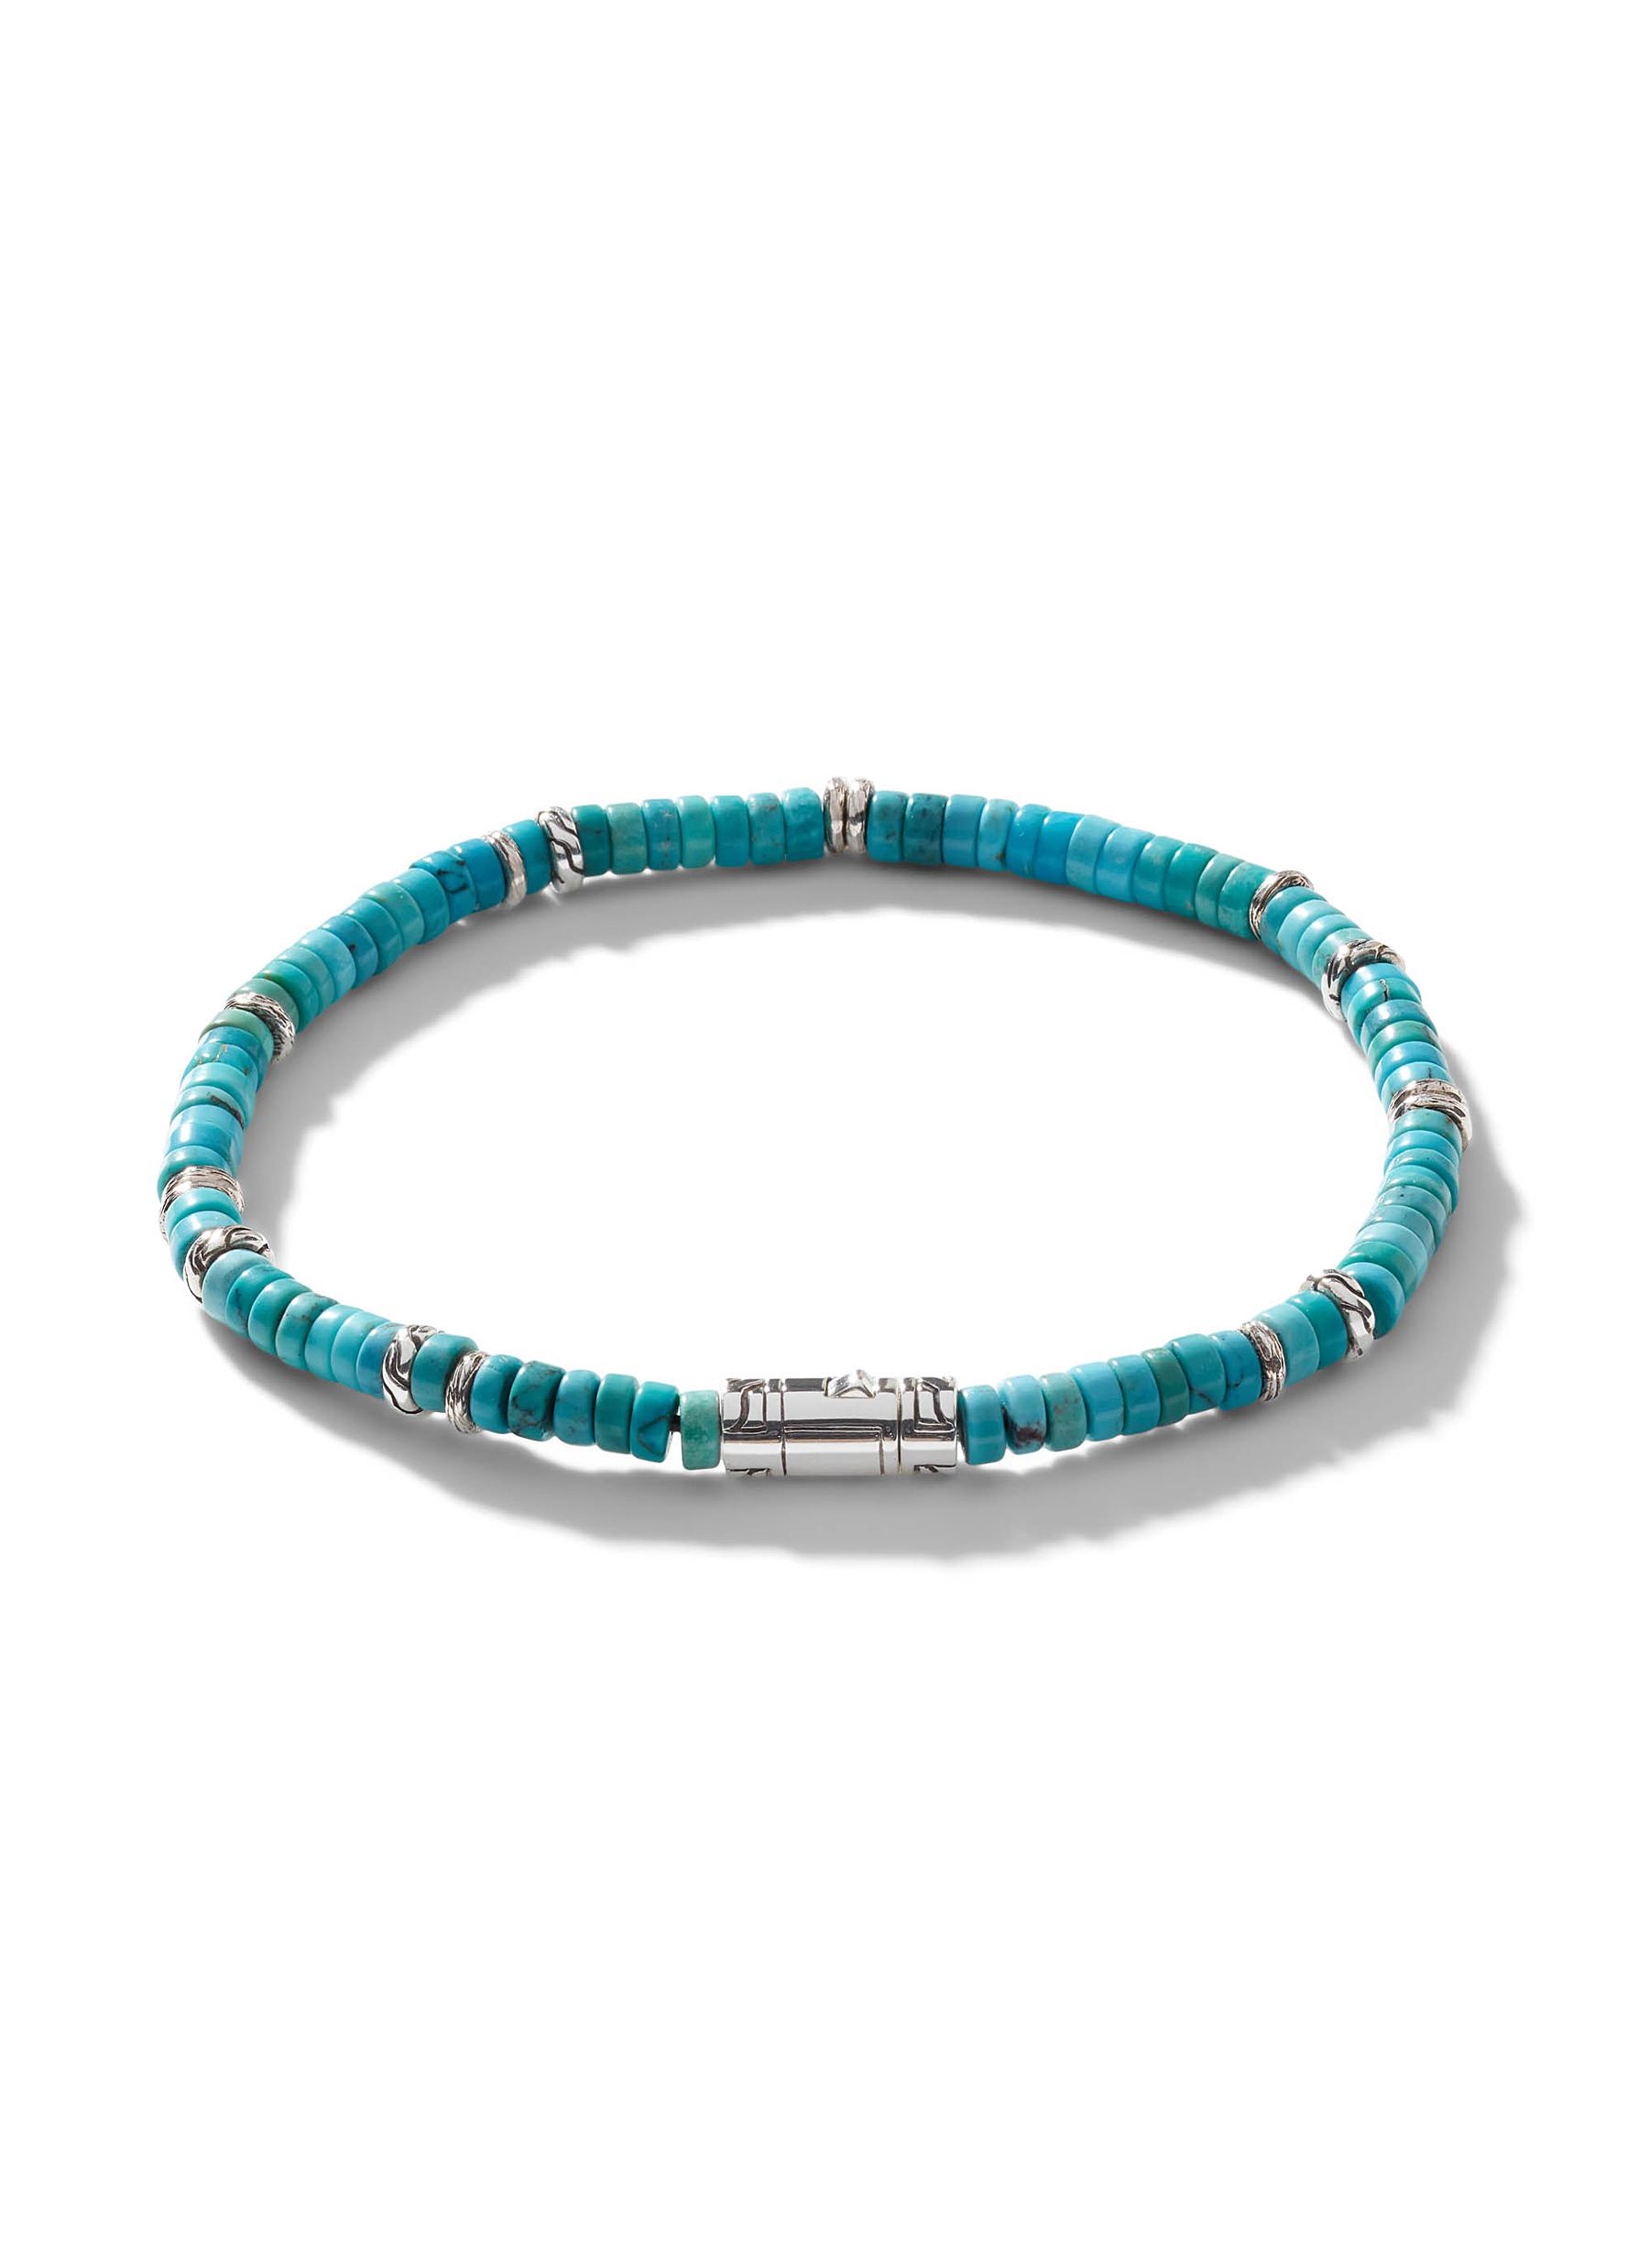 JOHN HARDY 'CLASSIC CHAIN' STERLING SILVER HEISHI TREATED TURQUOISE BEAD BRACELET